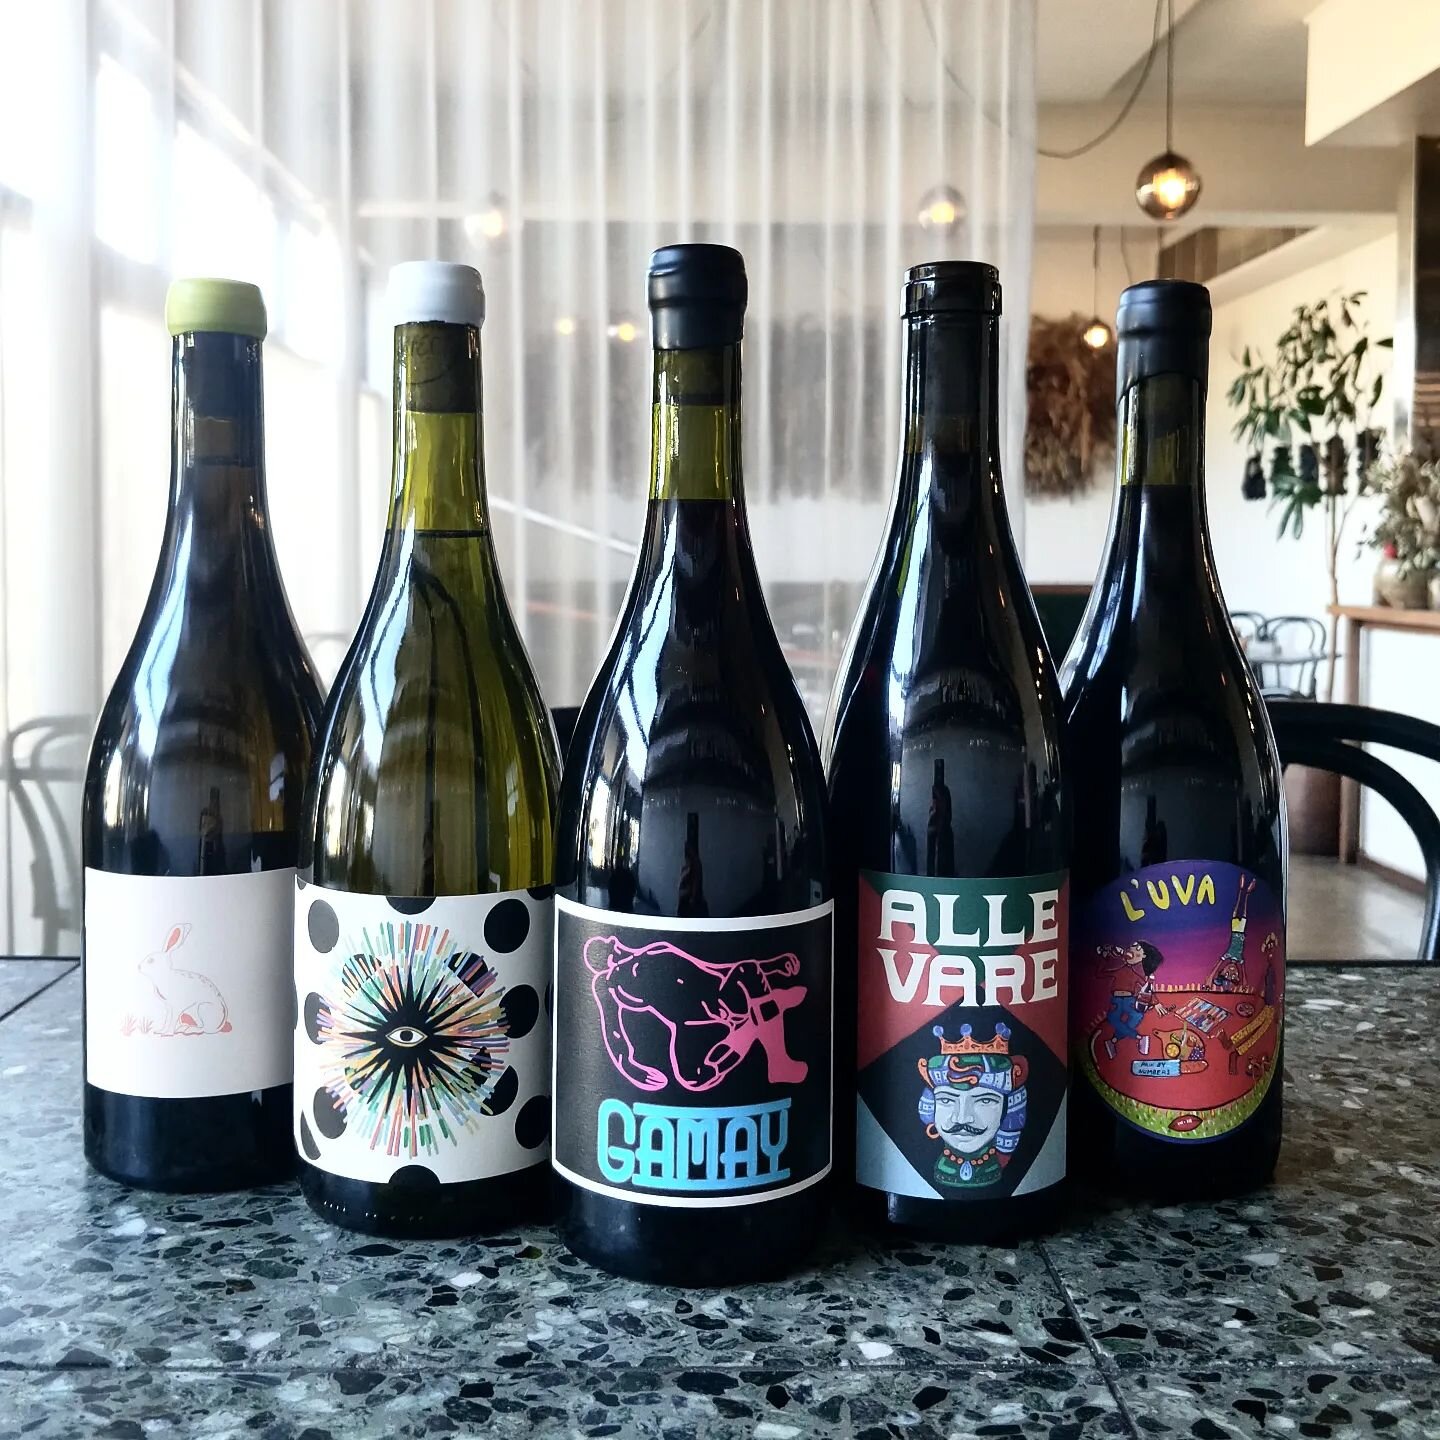 Vibrant wines from cooler climates, plenty of artistry happening inside and outside these bottles. On the pour, on the pairing, and on the list this week.